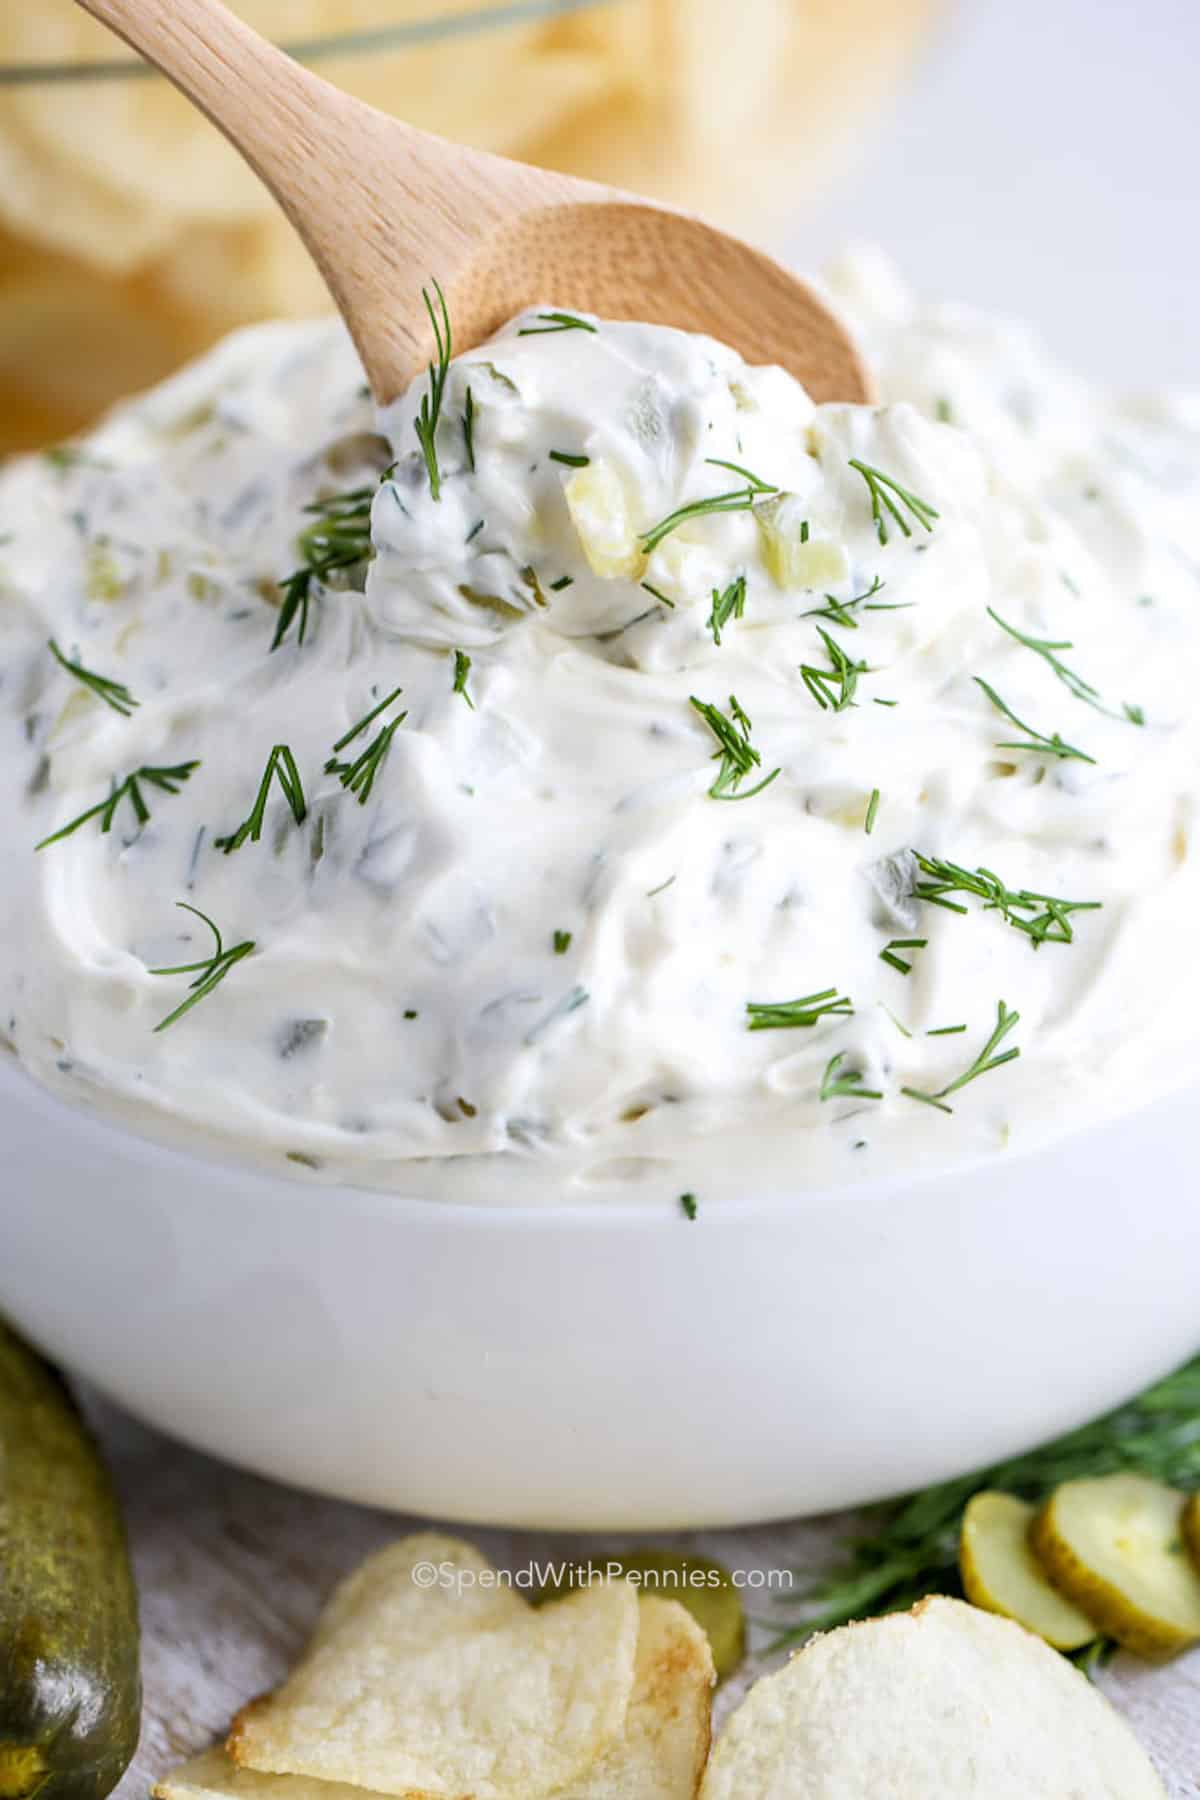 a spoon scooping dill pickle dip from a white bowl